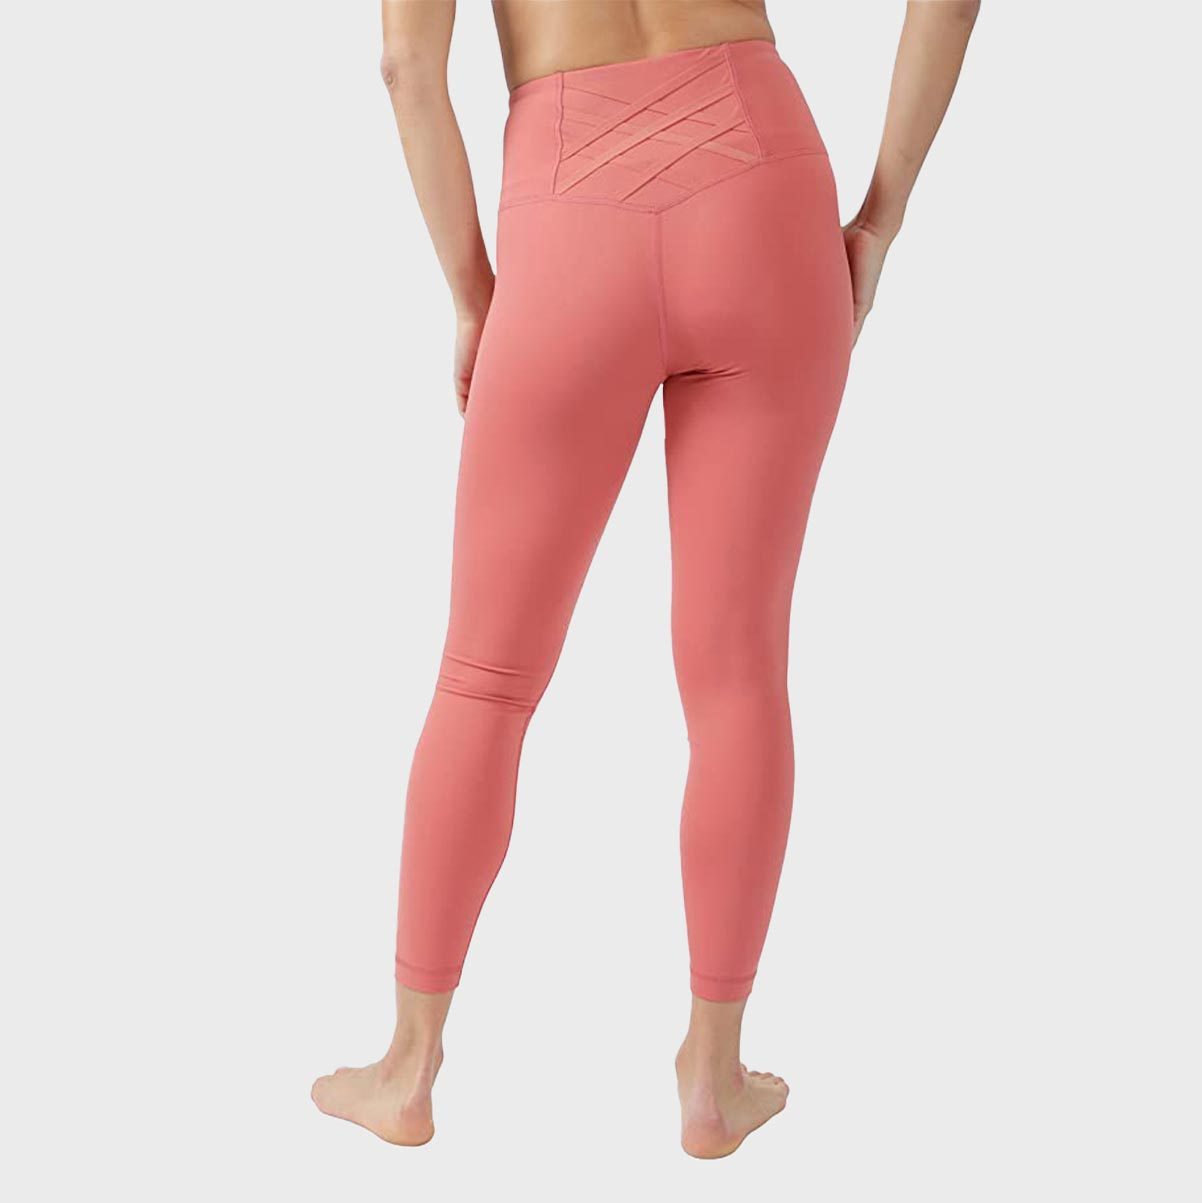 Yogalicious High Waisted Leggings for Women - Buttery Soft Second Skin Yoga  Pants